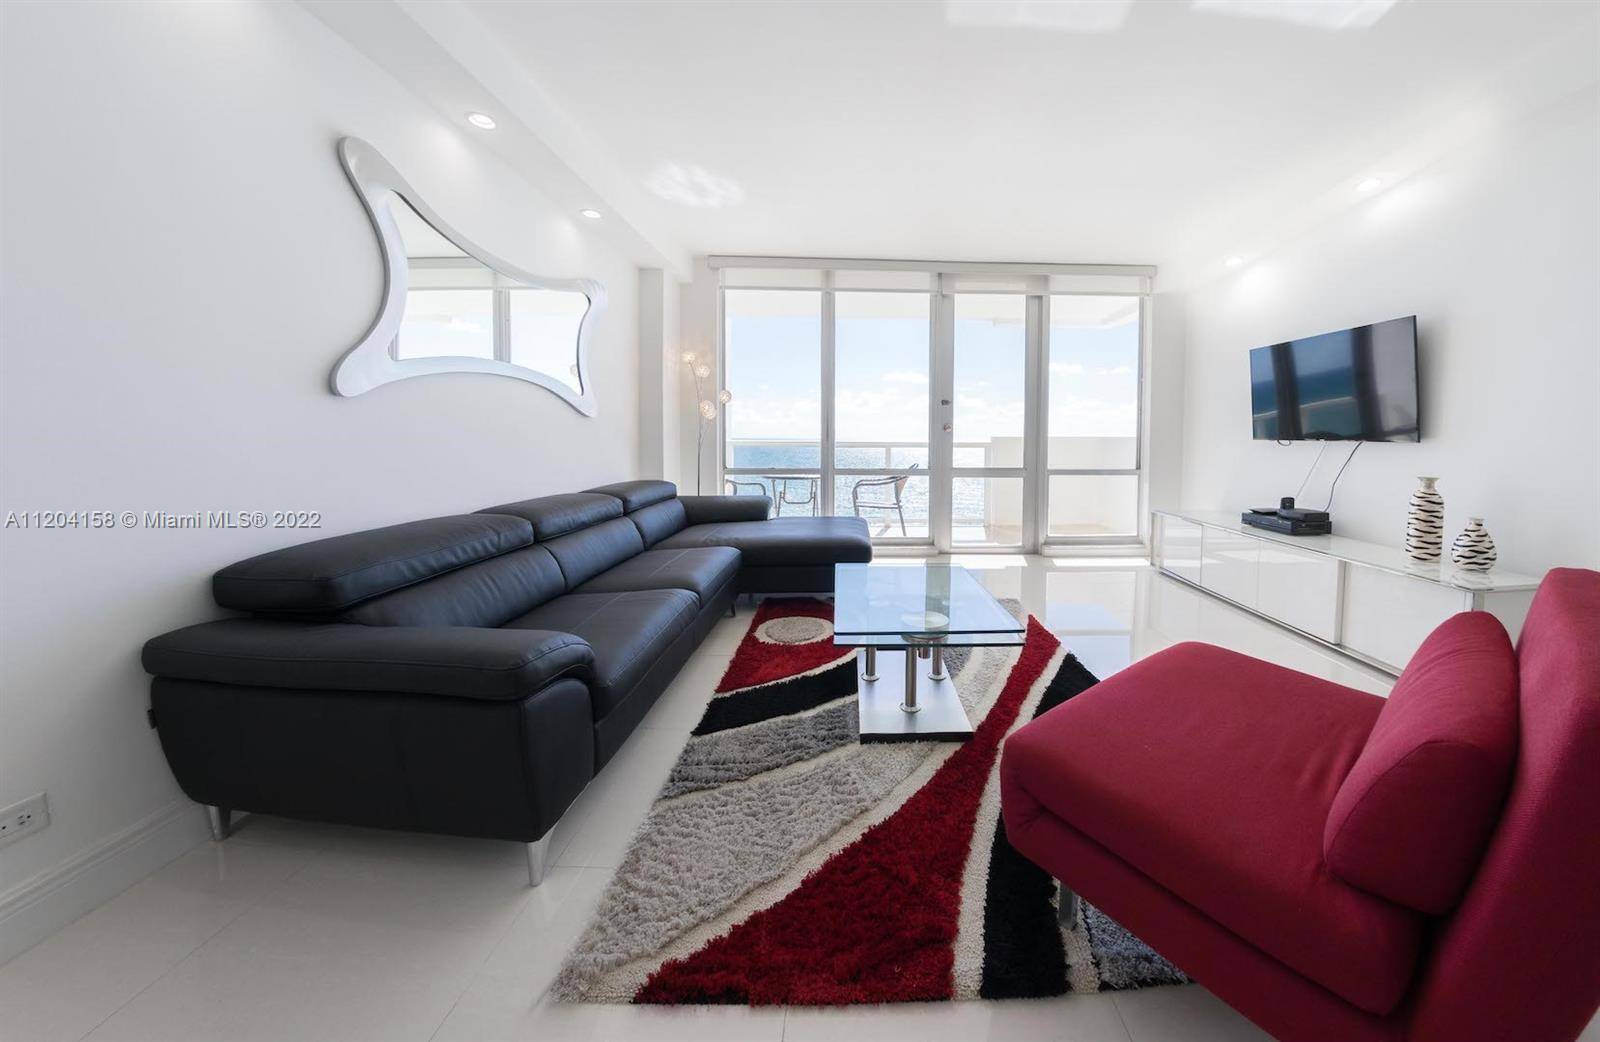 Welcome to Ocean Front Pavilion Condominium, A fully furnished apartment in the best Miami Beach style.